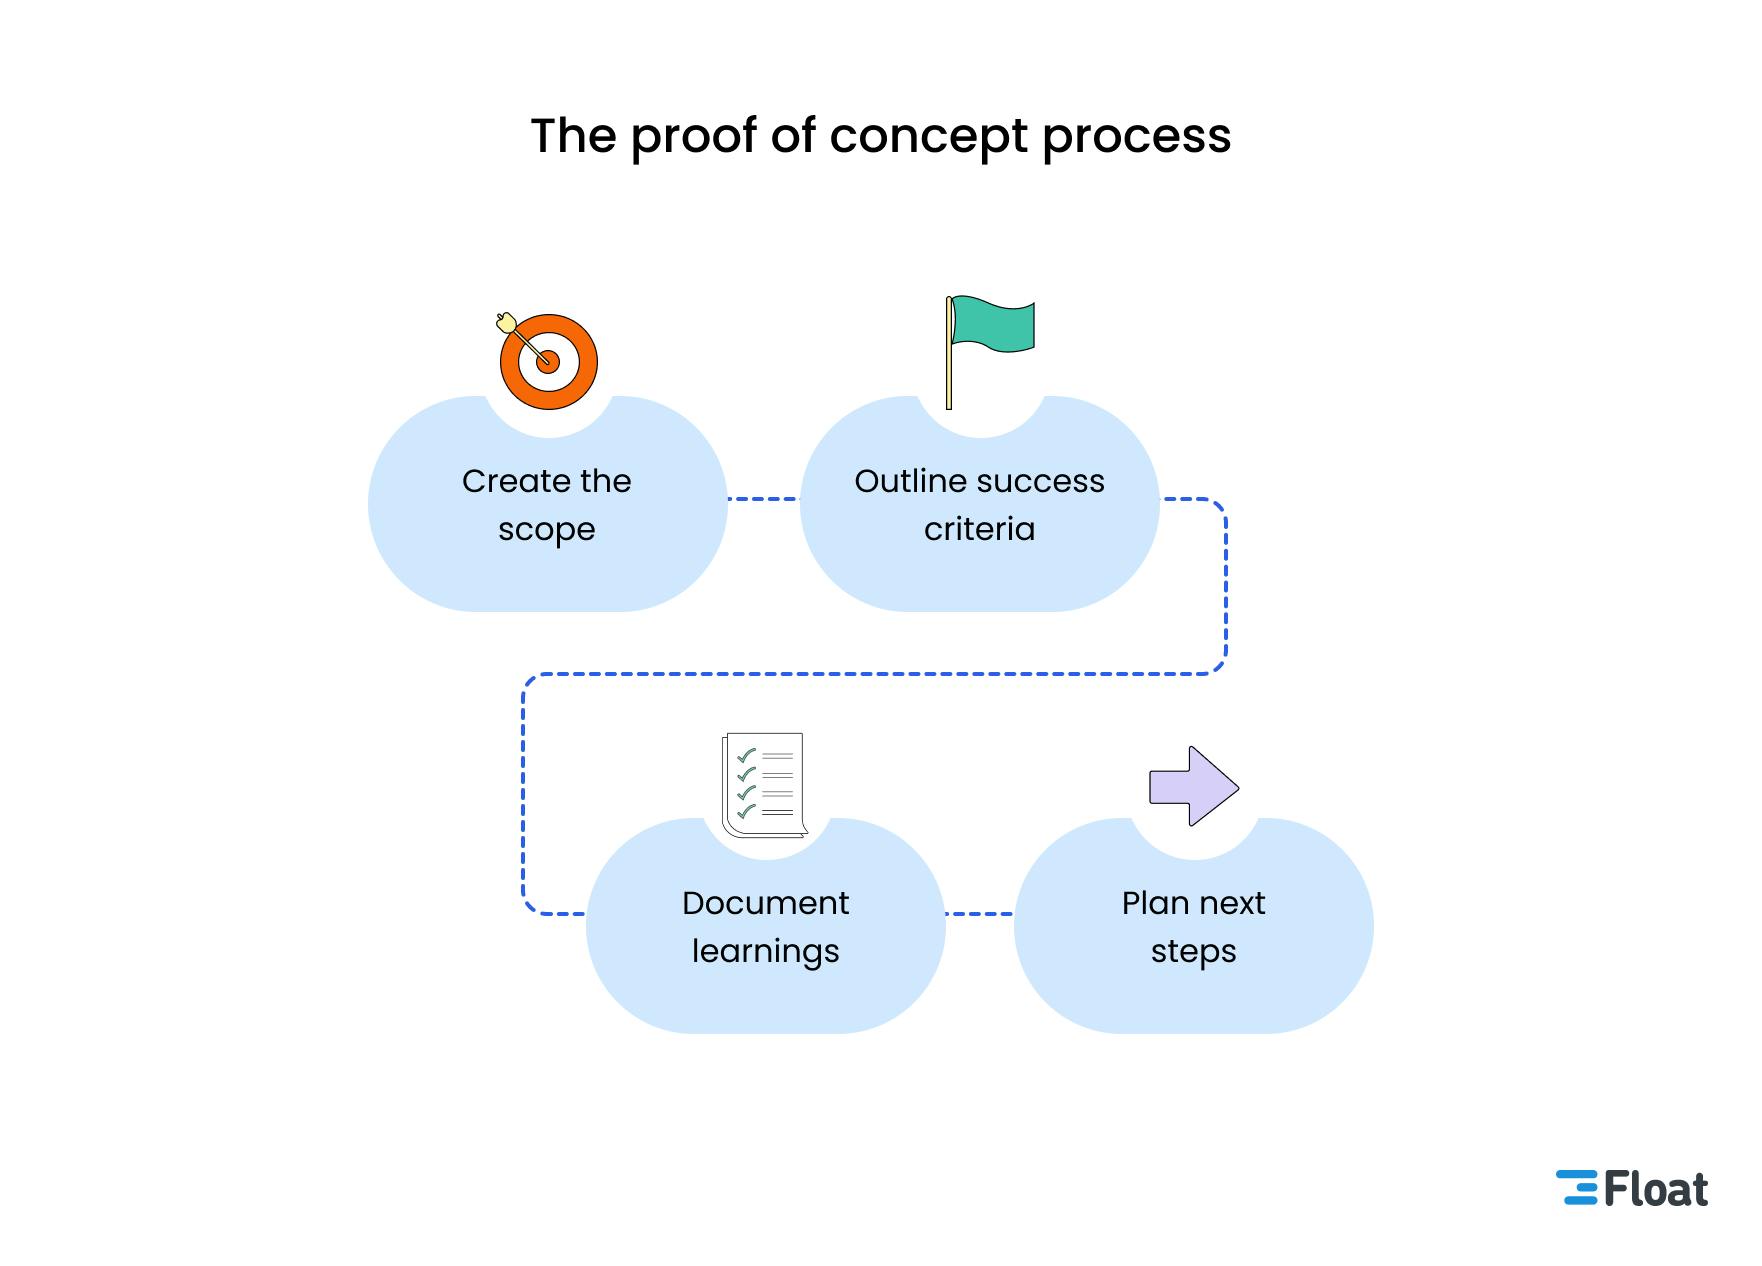 The proof of concept process